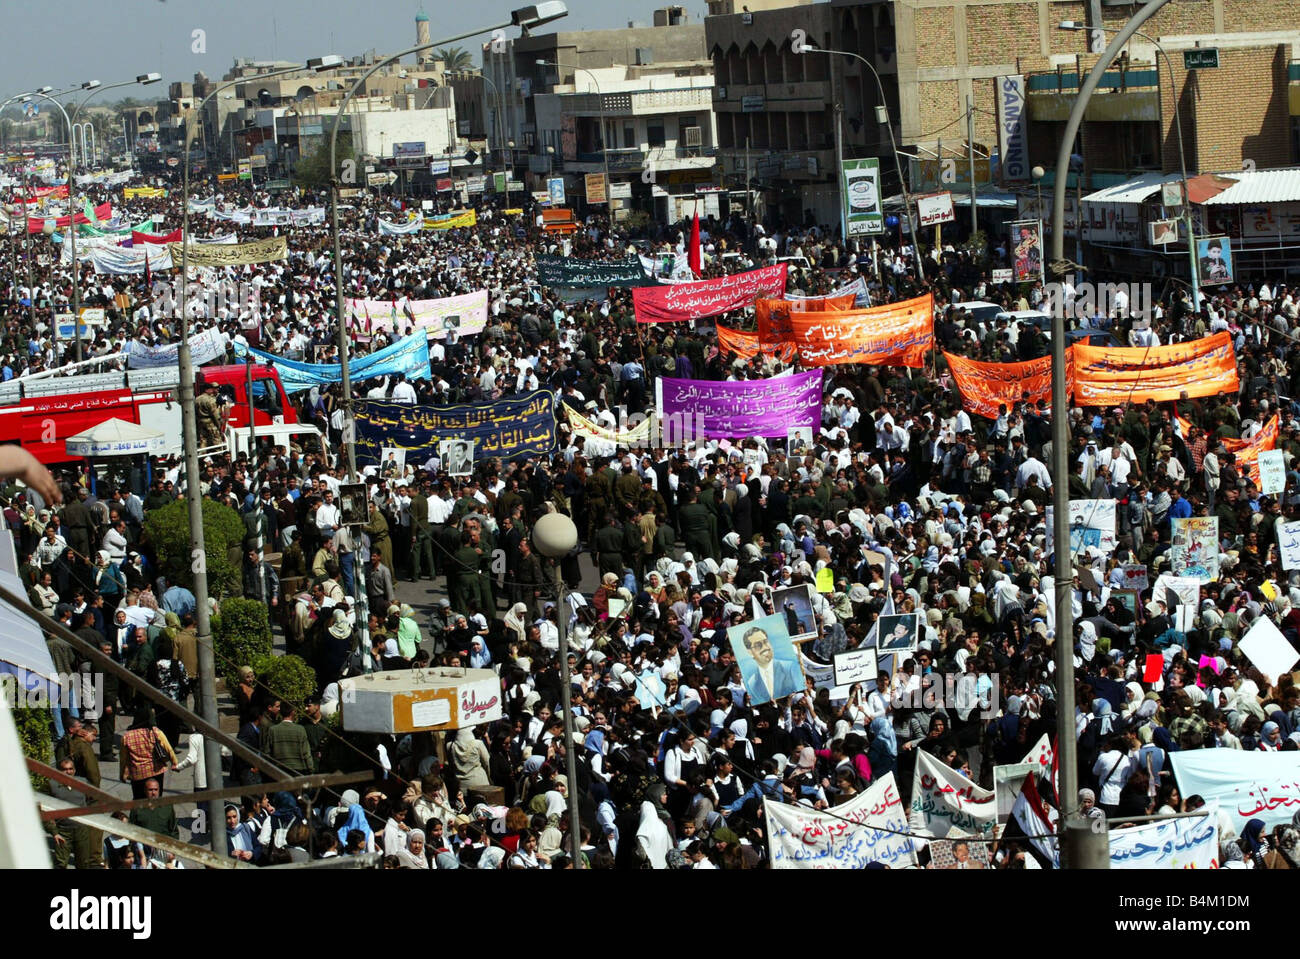 A Iraqi government sponsored Anti American demonstration on a Baghdad street prior to the US led invasion Our Picture Shows Crowds holding banners shout and march down a major road in Baghdad Stock Photo